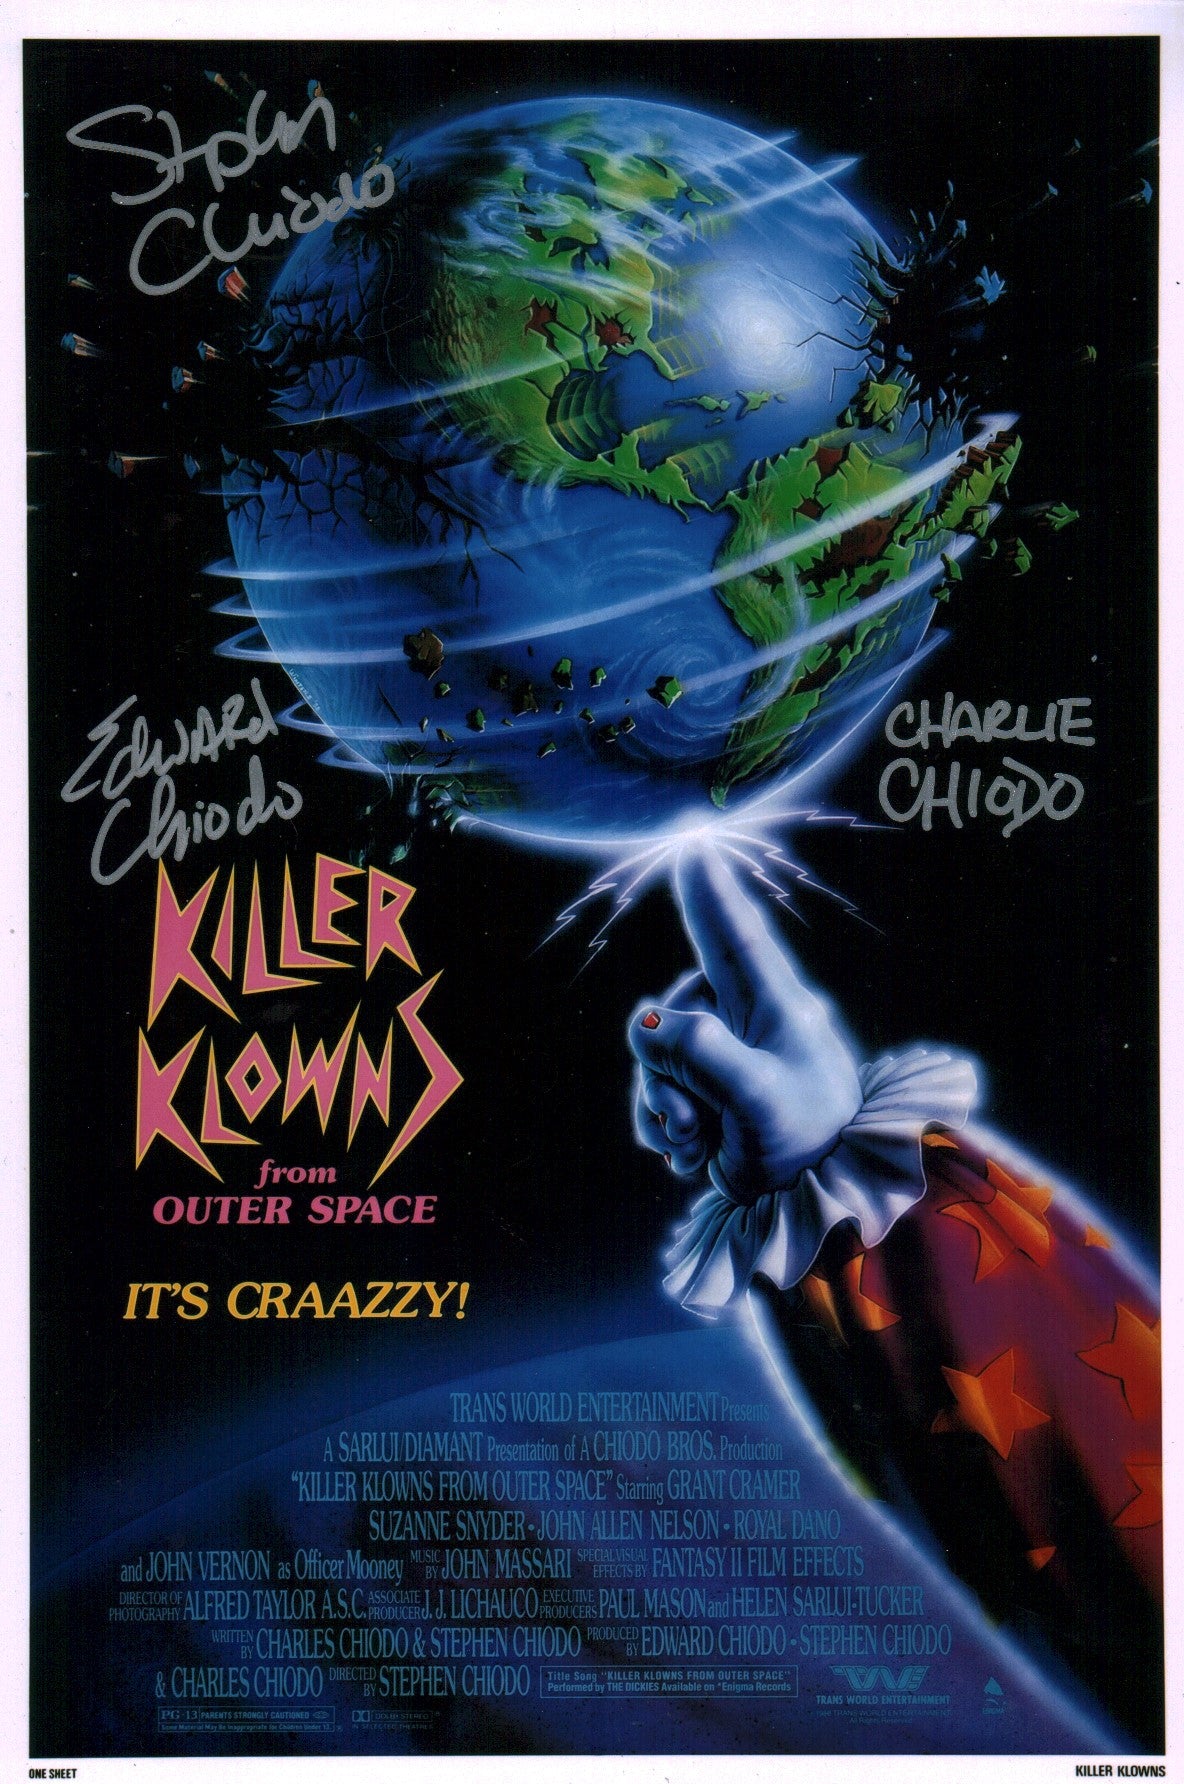 Killer Klowns from Outer space 8x12 Signed Photo JSA Certified Autograph